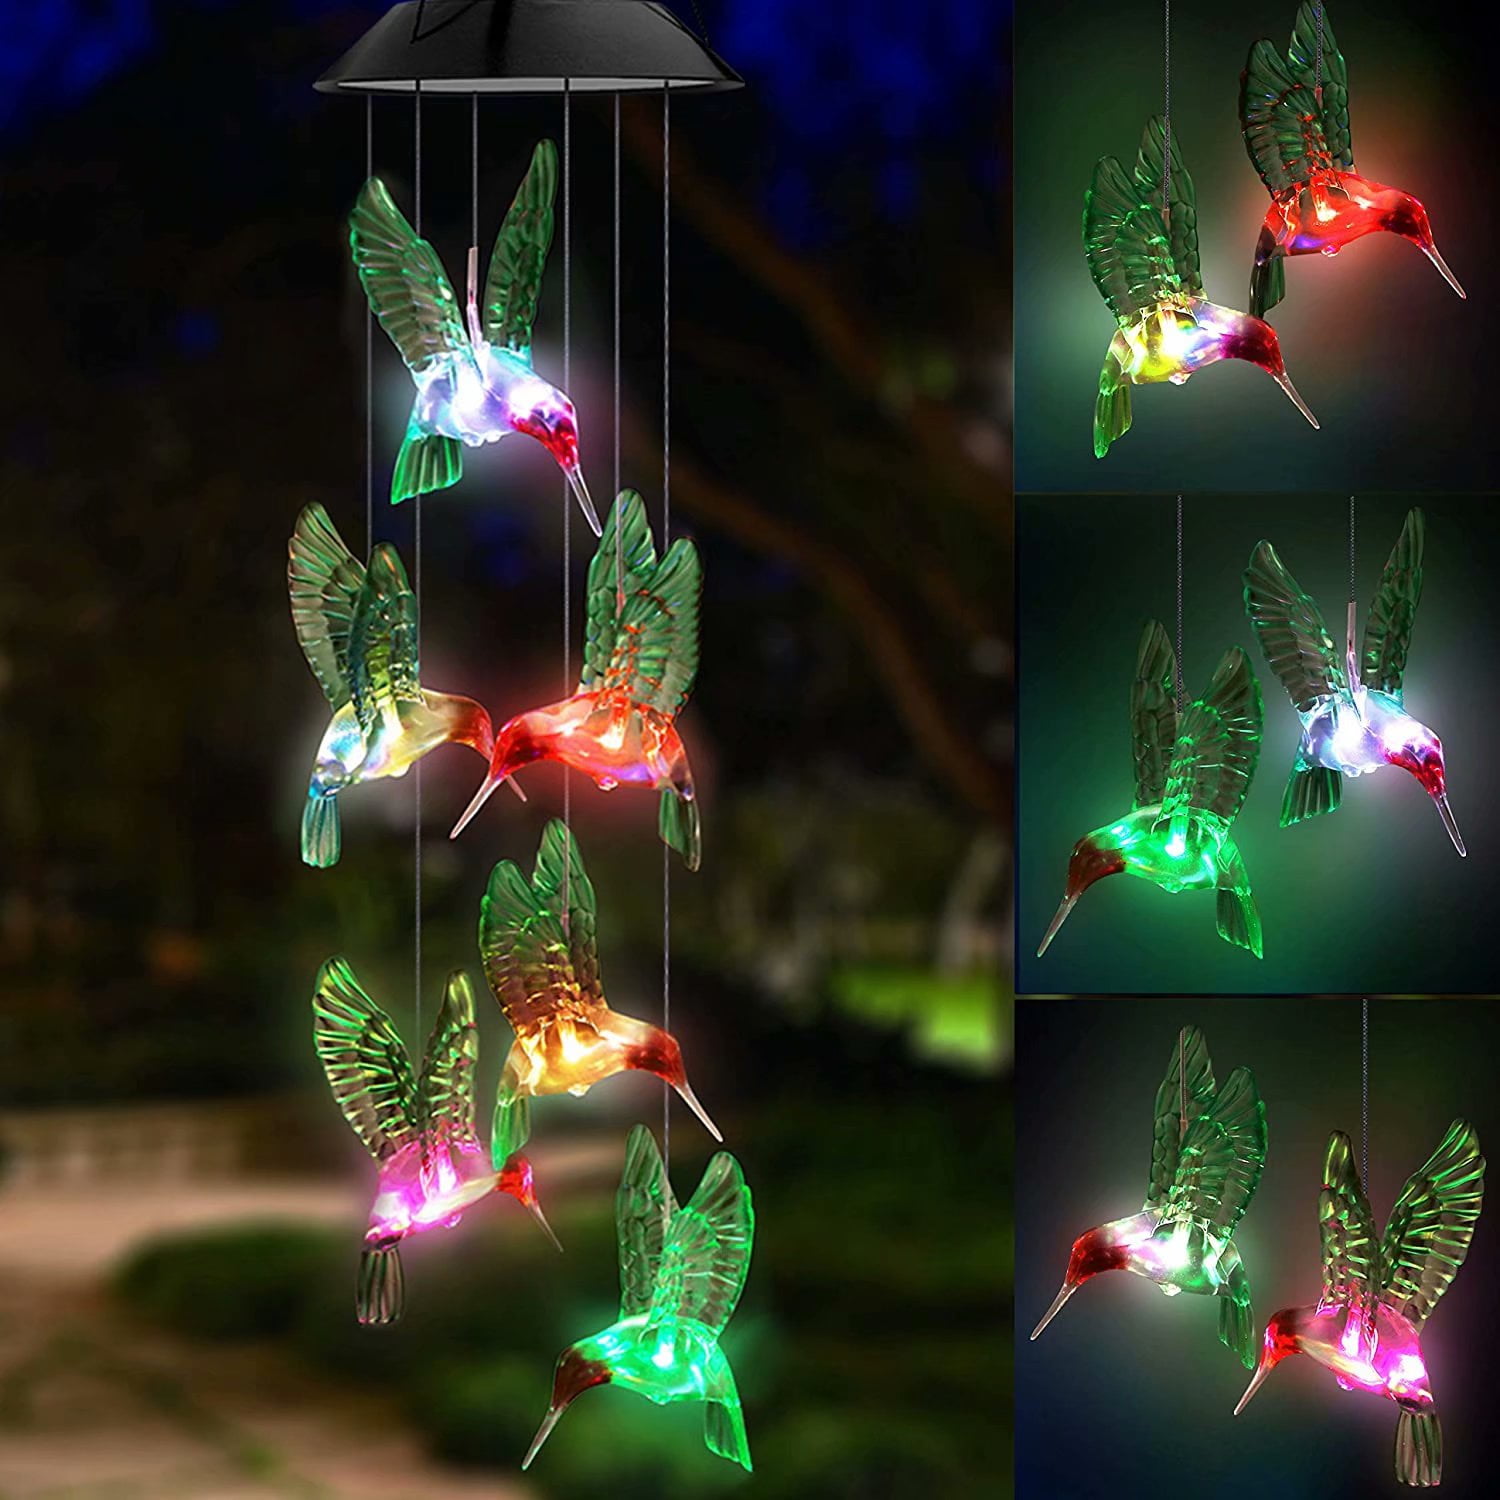 Type 1 Wind Chime Solar Light Swonuk Outdoor Color-Changing LED Wind Chime Decorative Windbell Light for Garden Patio Yard Deck